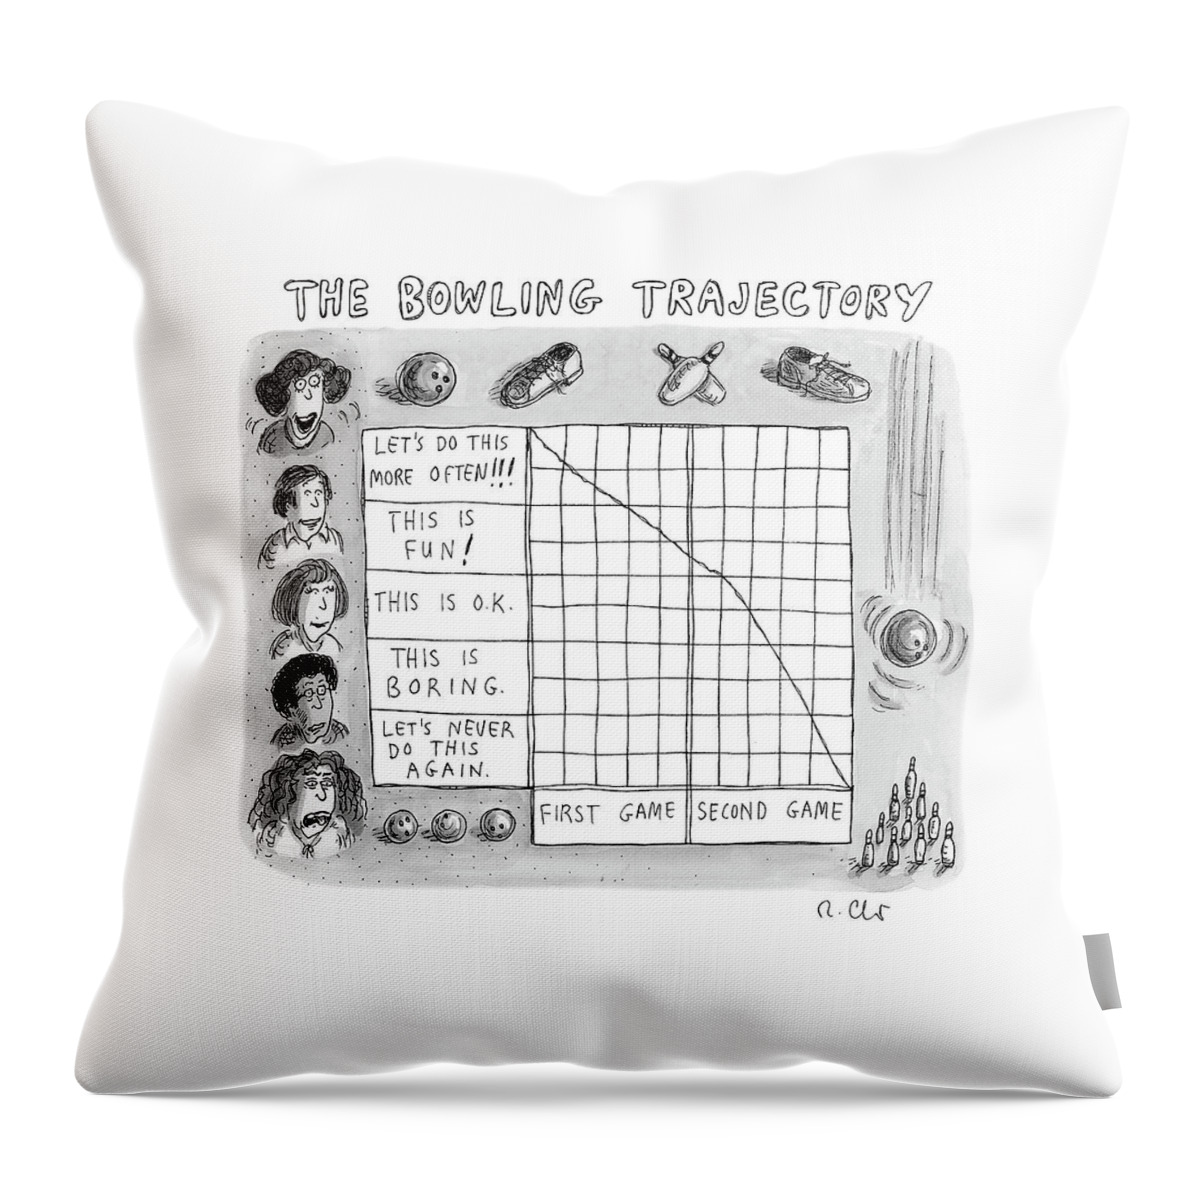 Bowling Trajectory Throw Pillow